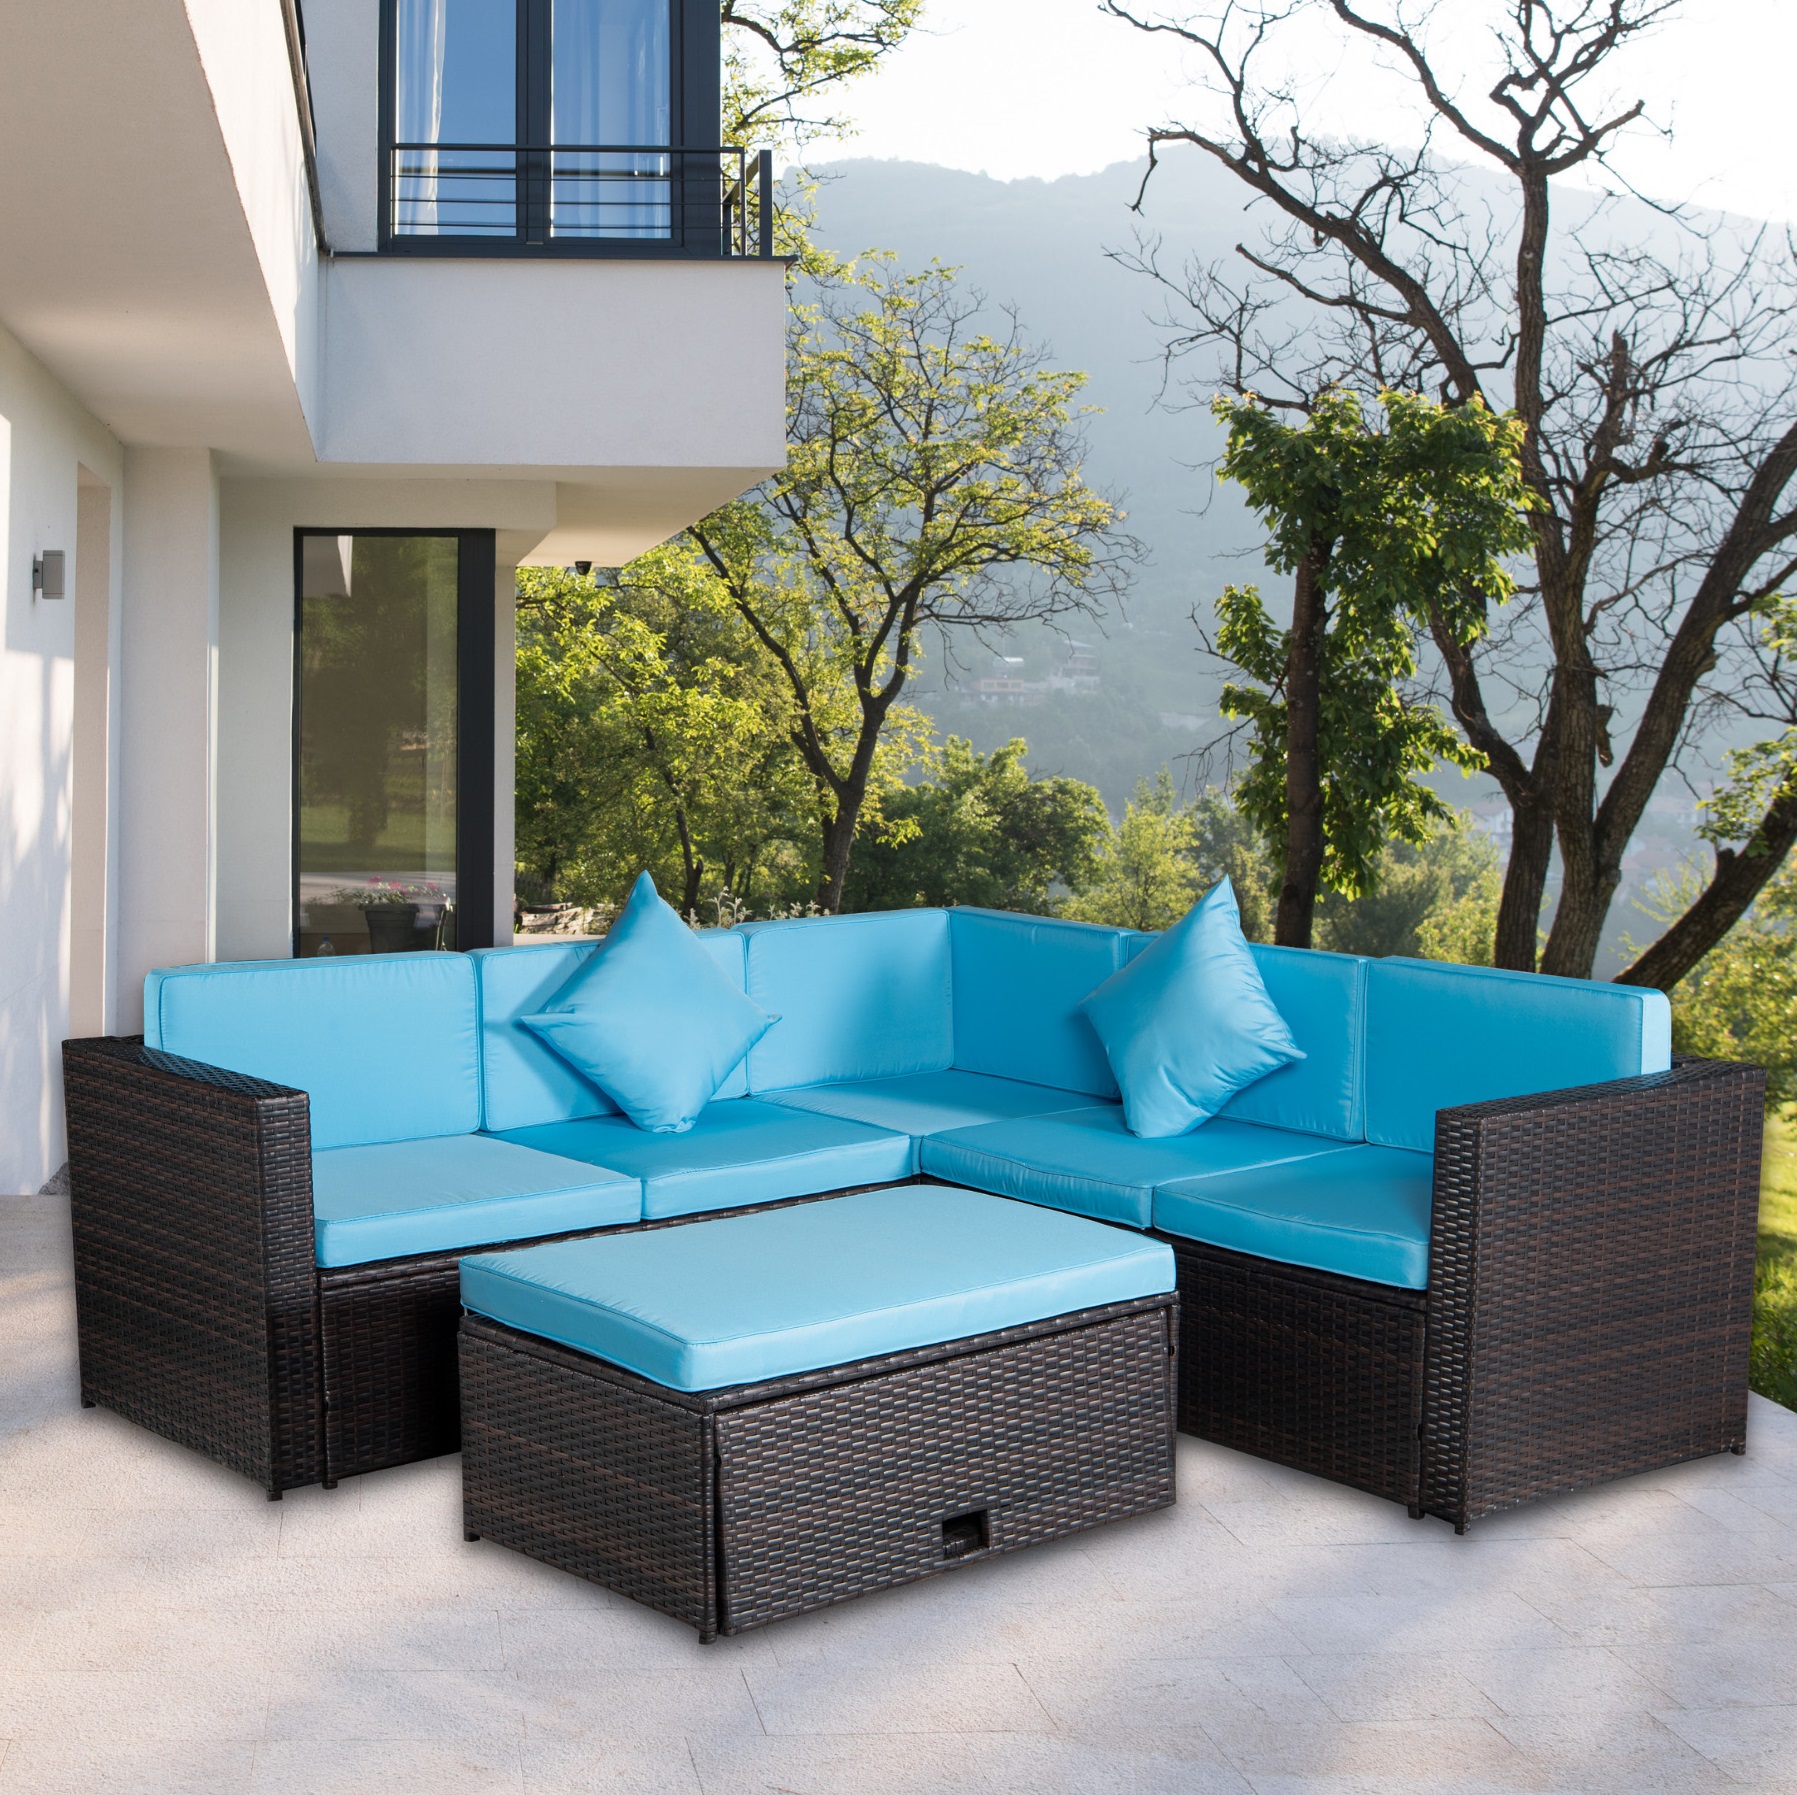 SYNGAR Outdoor Furniture Sets Sofa Sets, 4 PCS Conversation Sets Sectional Furniture Set with 2 Loveseat, Corner Chair, and Wicker Table for Garden Poolside Deck, LJ3279 - image 2 of 11